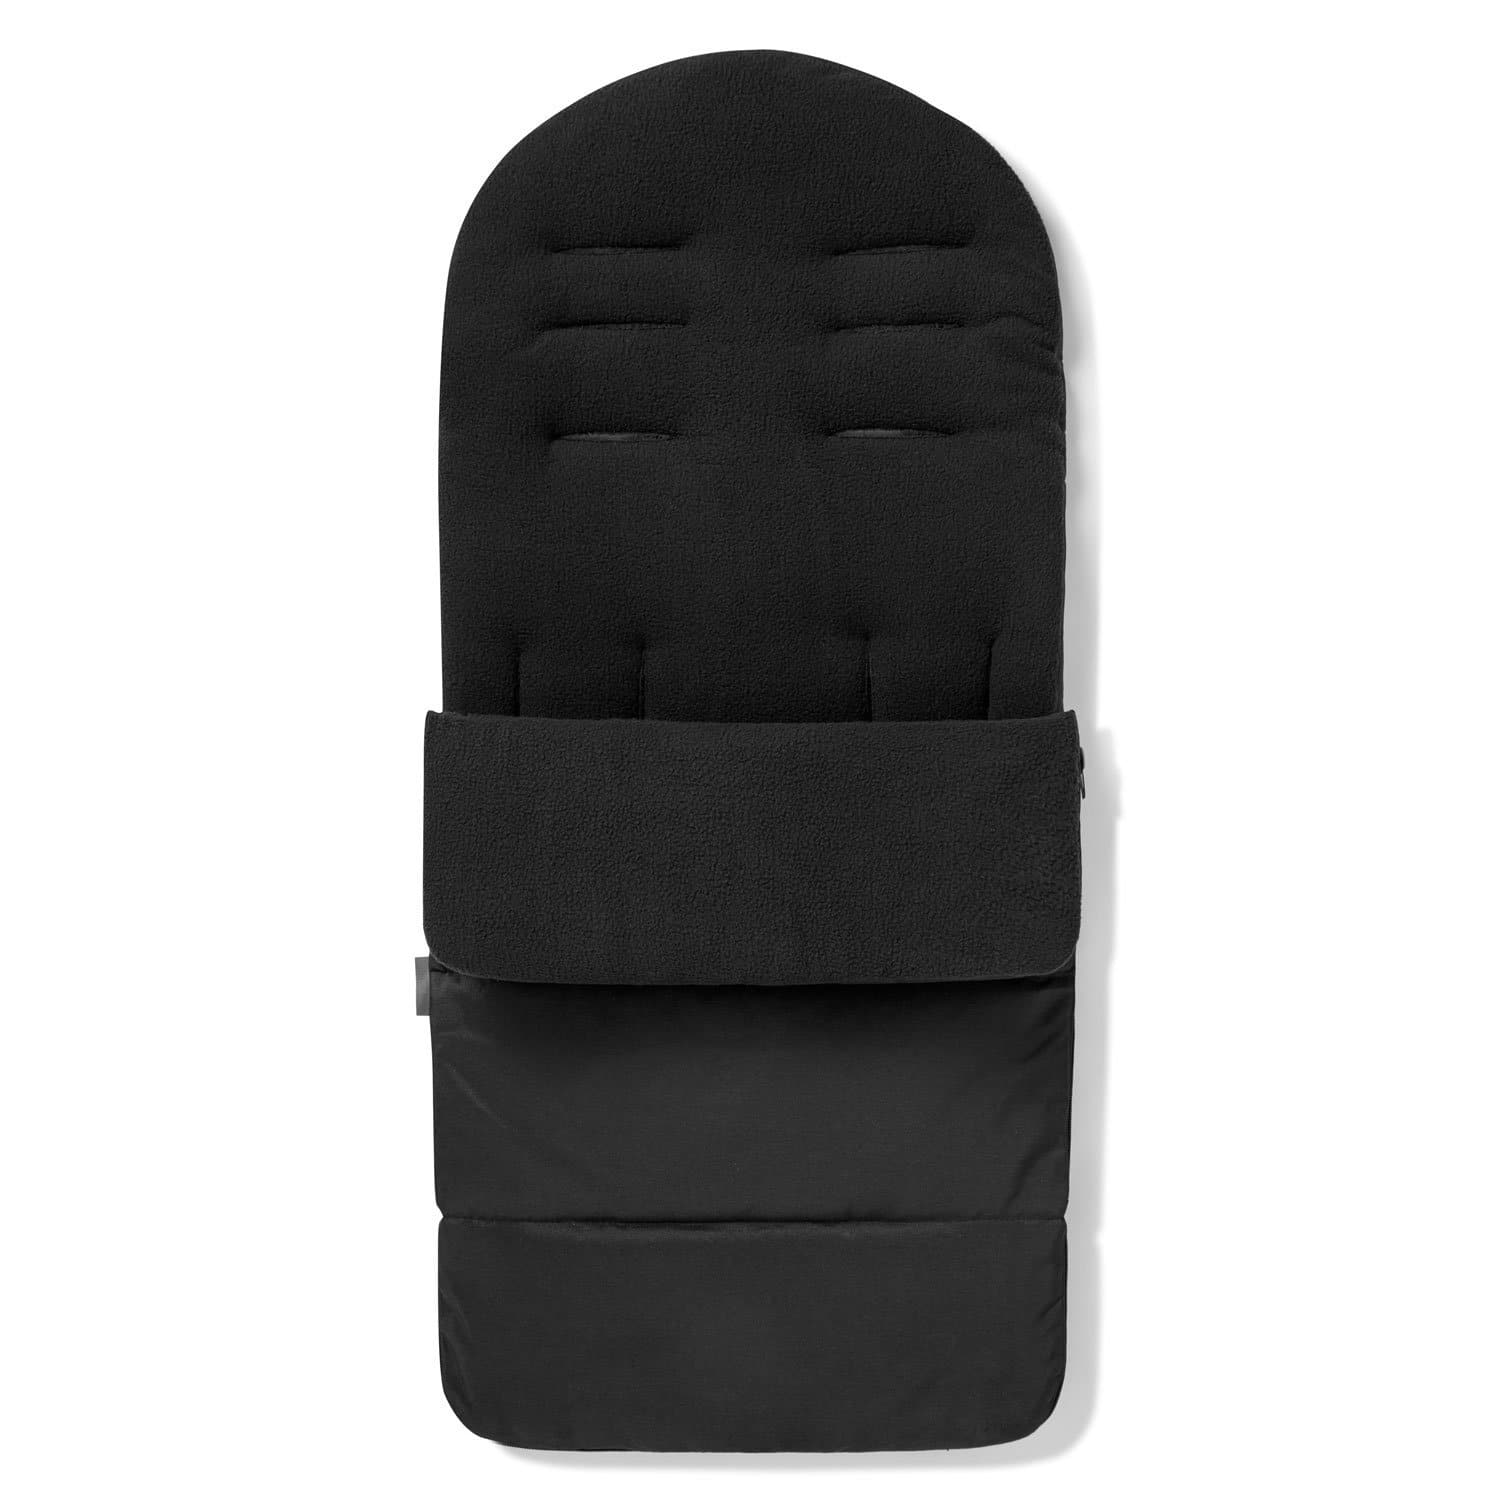 Premium Footmuff / Cosy Toes Compatible with Inglesina - Black Jack / Fits All Models | For Your Little One